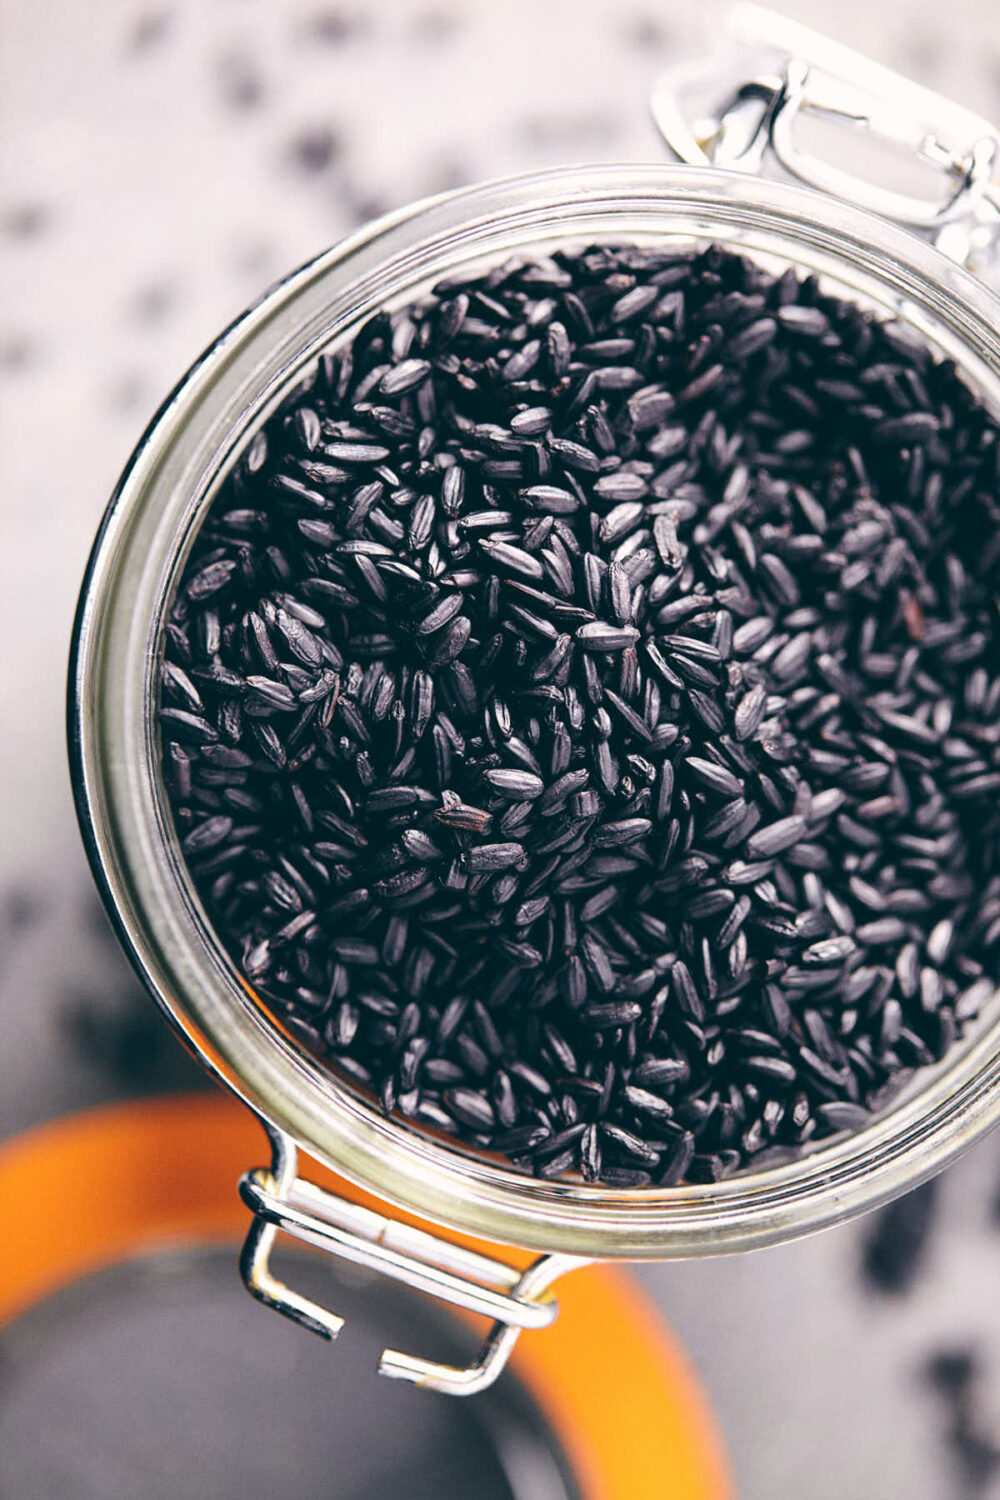 Black rice in a glass jar pre cooking